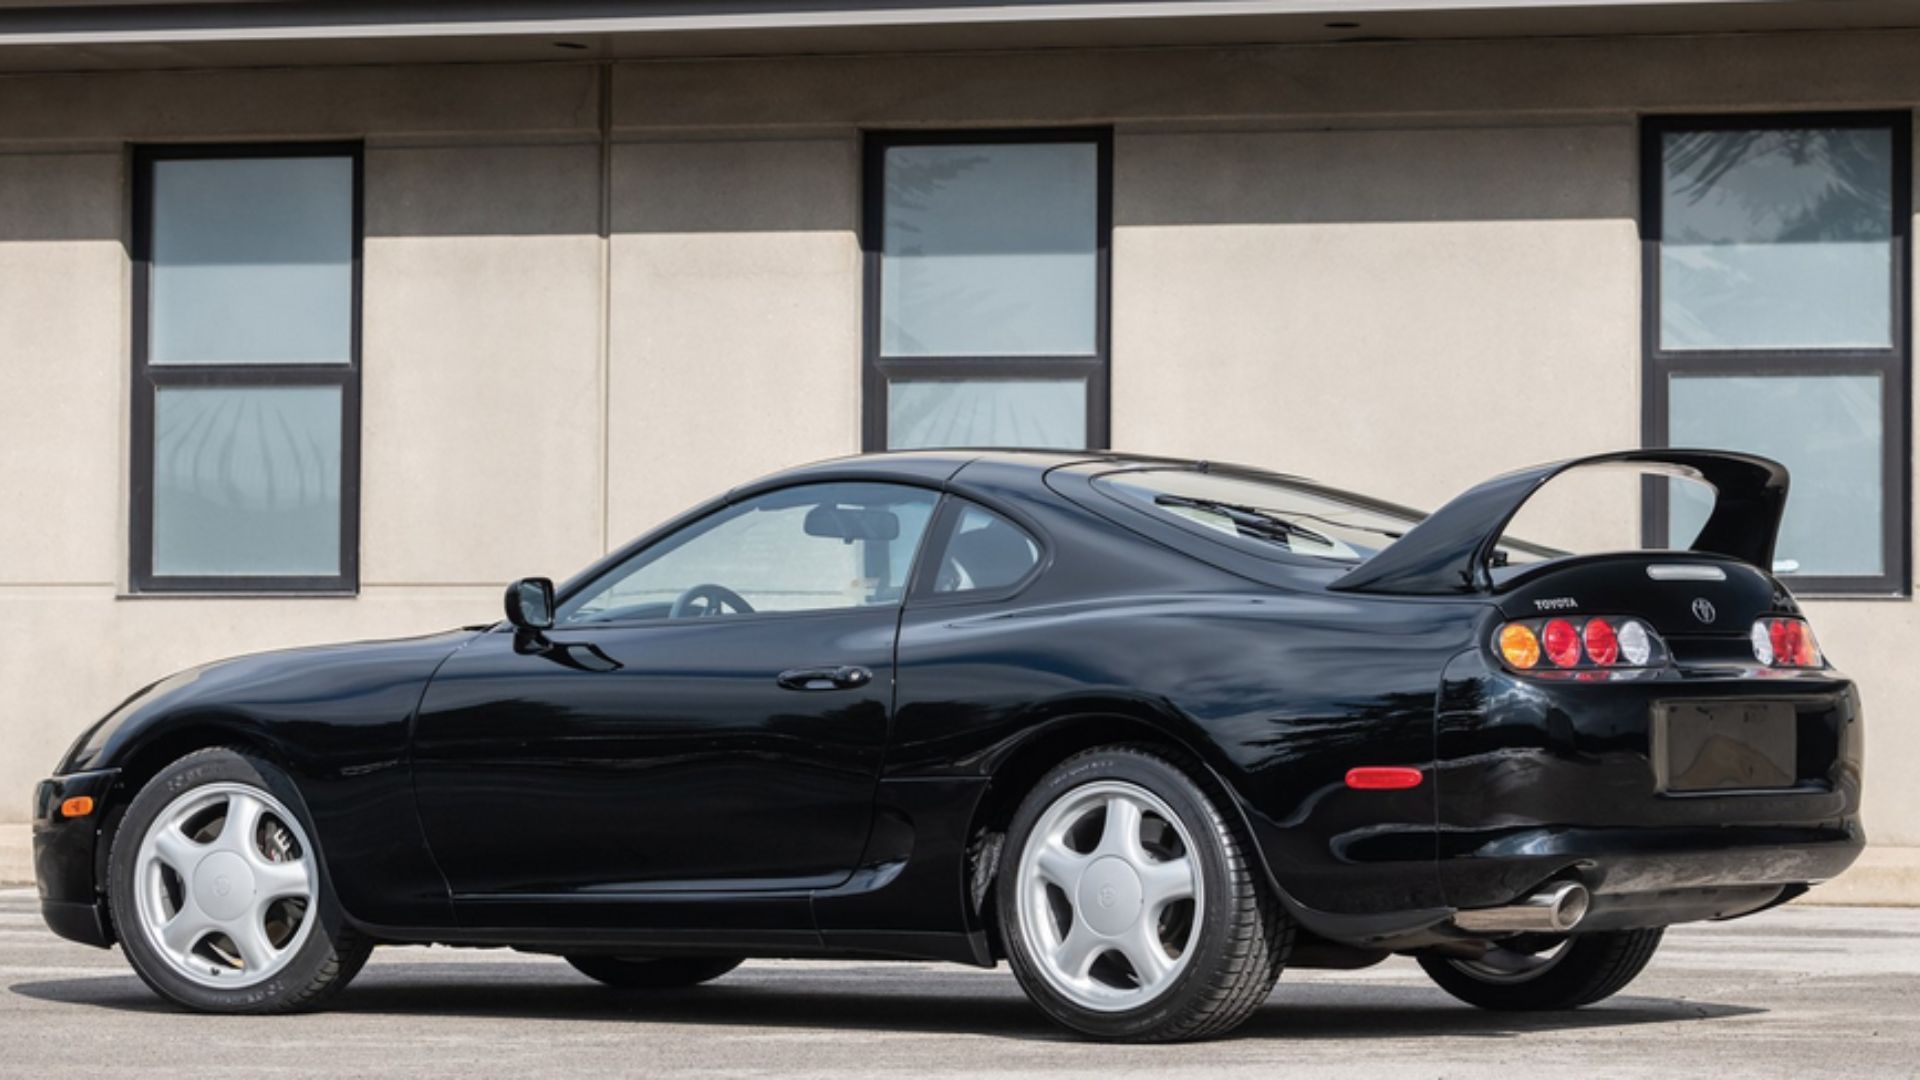 1993 Toyota Supra Turbo Auction Meets Expectations 